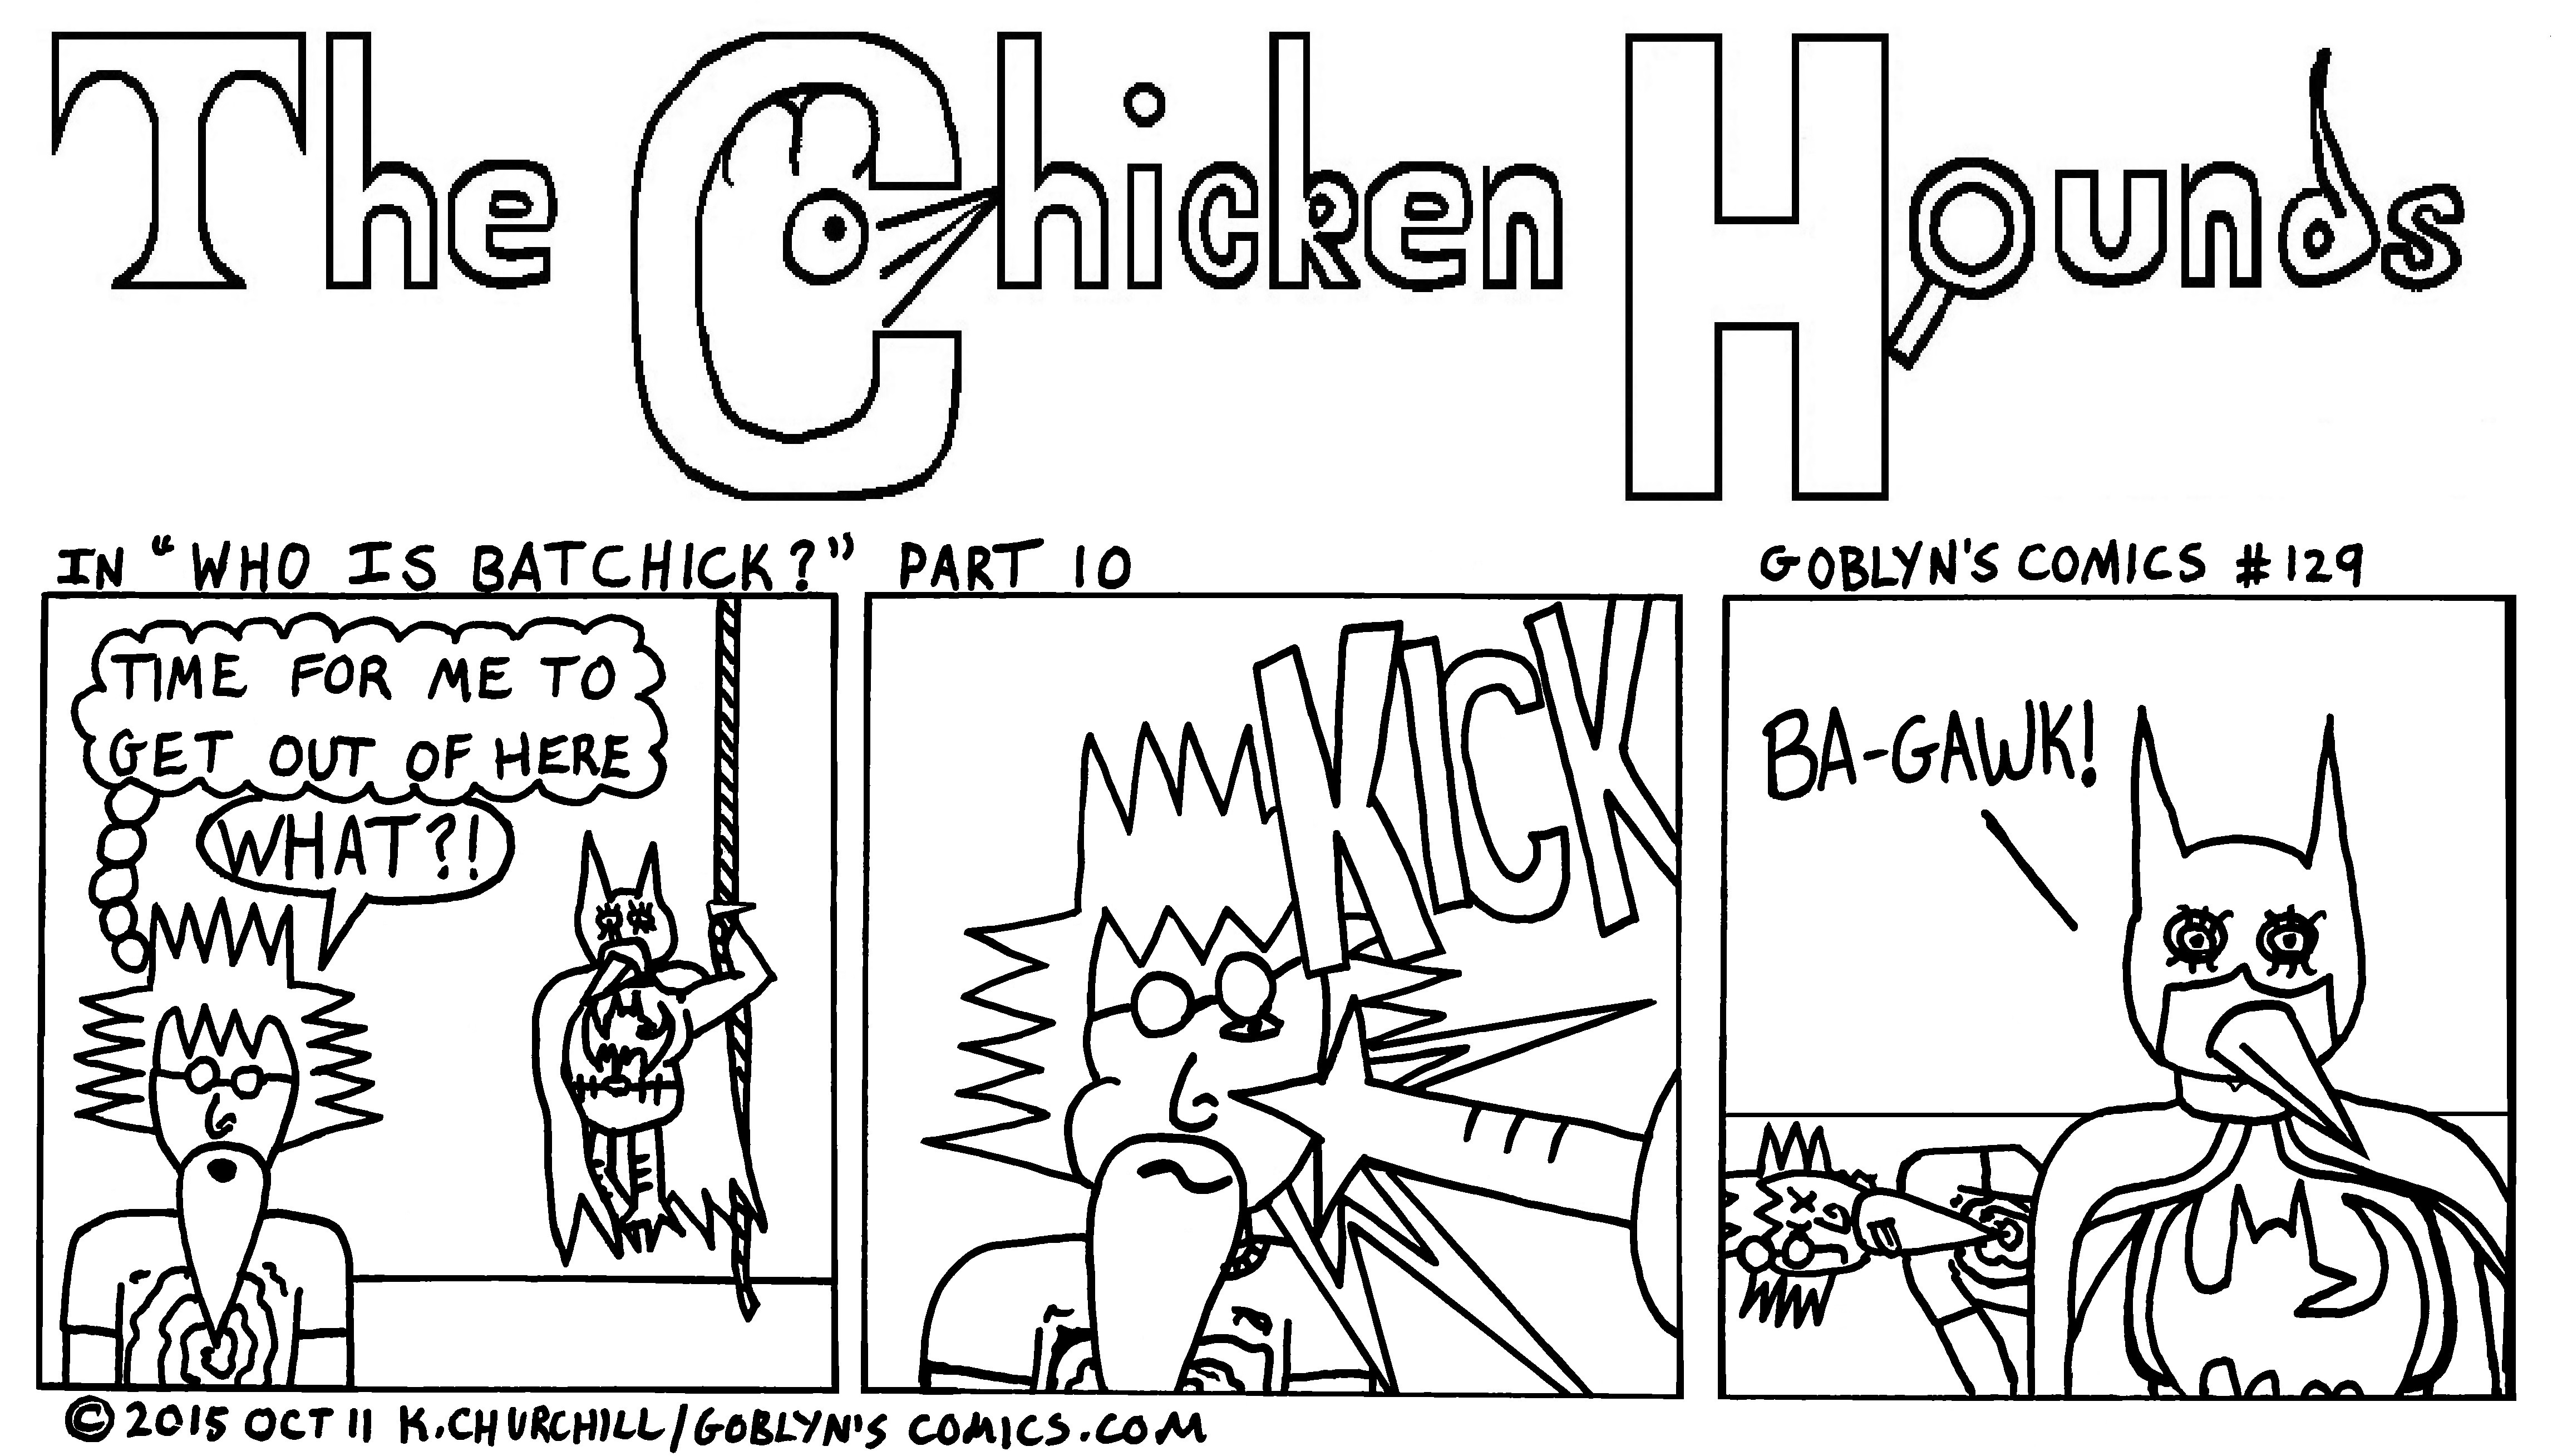 Chicken Hounds: Who Is BatChick?